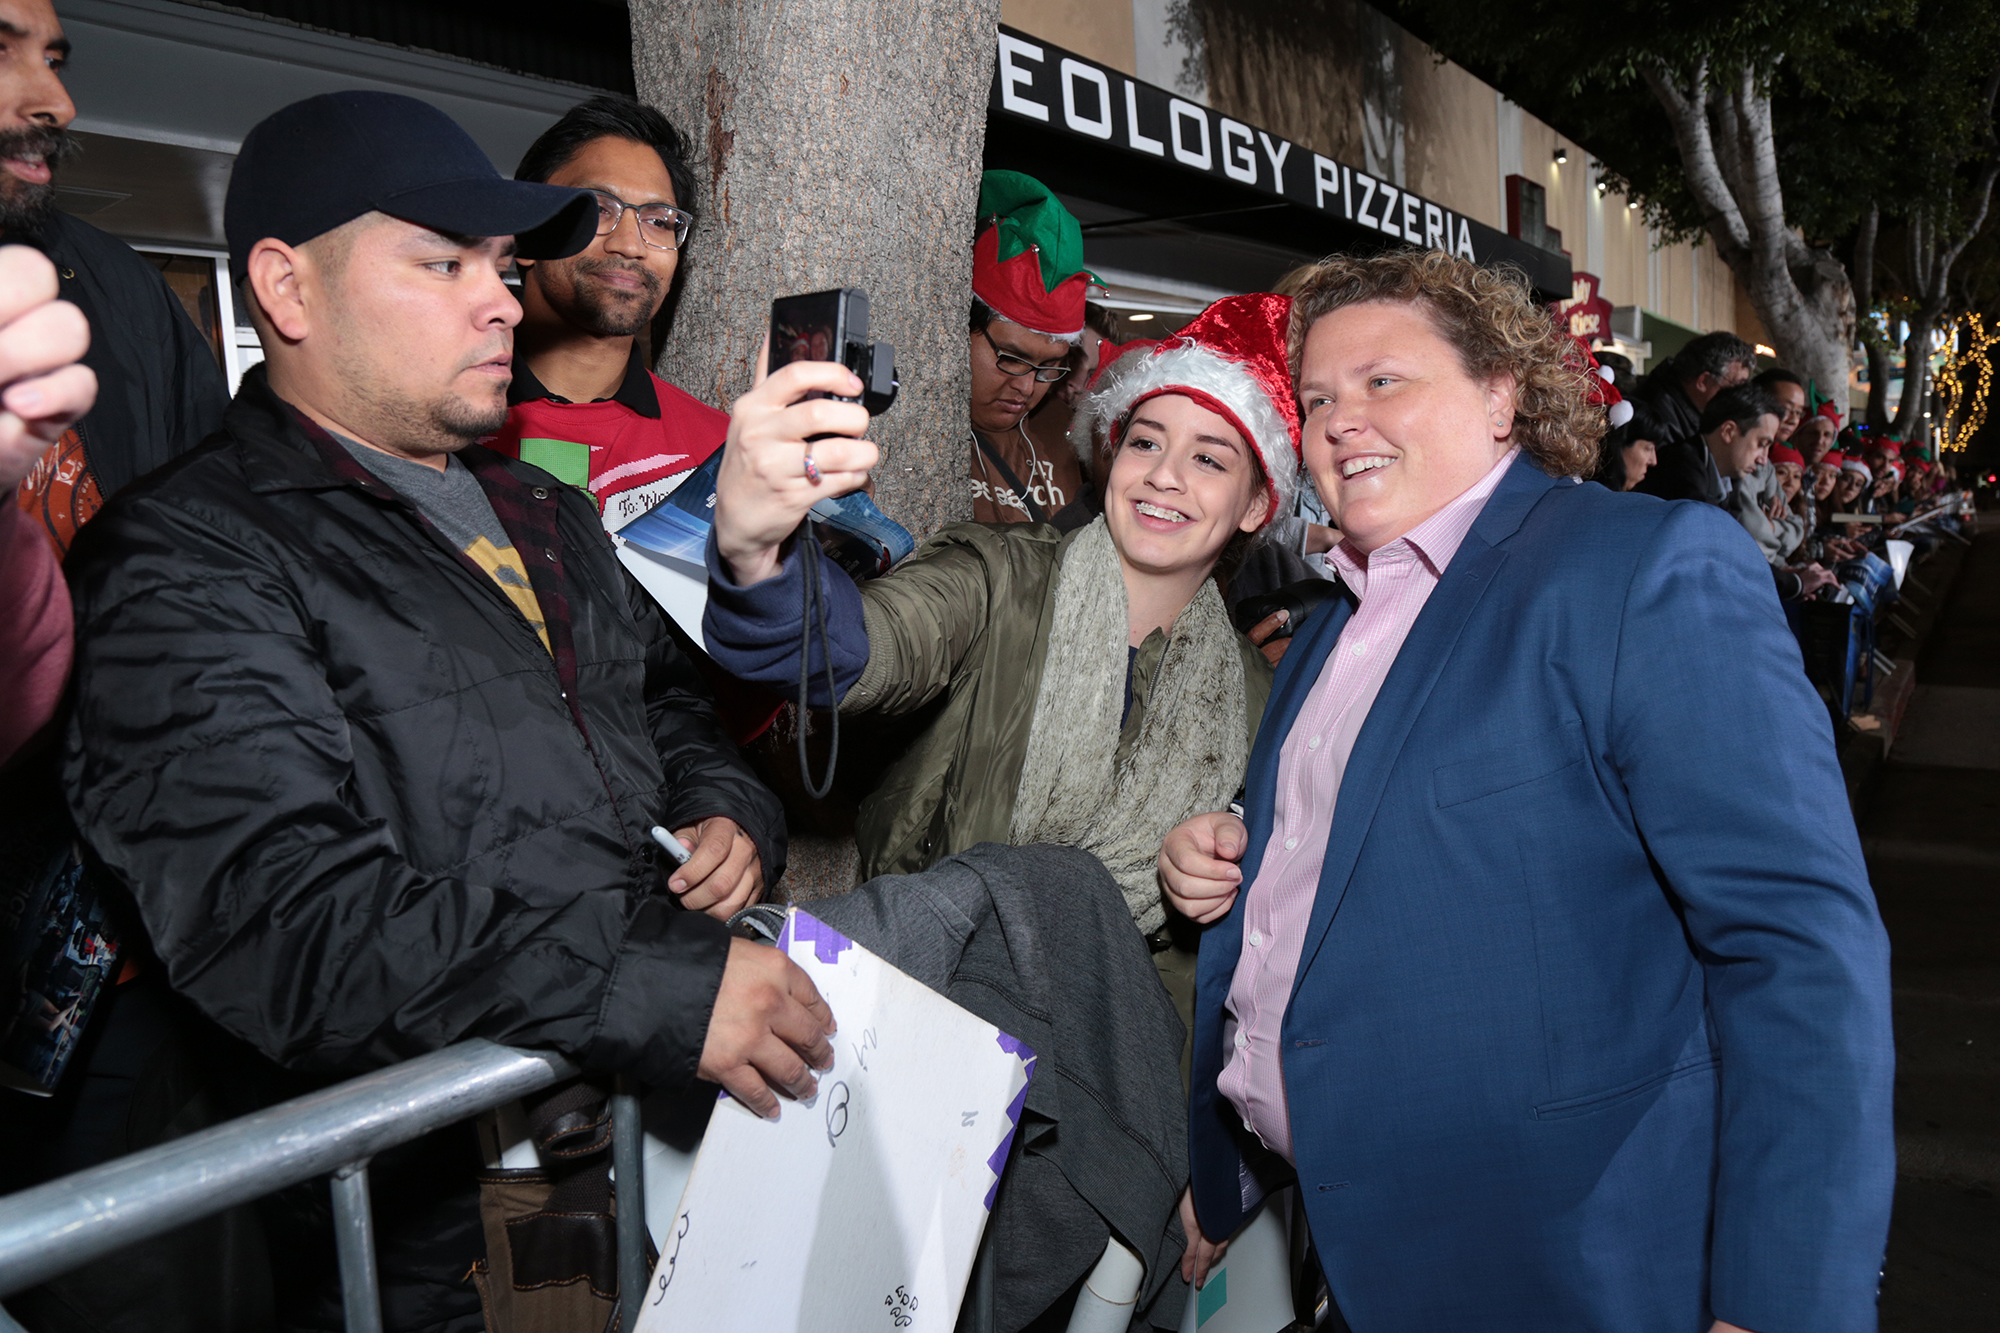 Fortune Feimster takes a selfie as Paramount Pictures presents the Los Angeles premiere of "Office Christmas Party" at the Regency Village Theater in Los Angeles, CA on Wednesday, December 7, 2016  (Photo: Alex J. Berliner / ABImages)